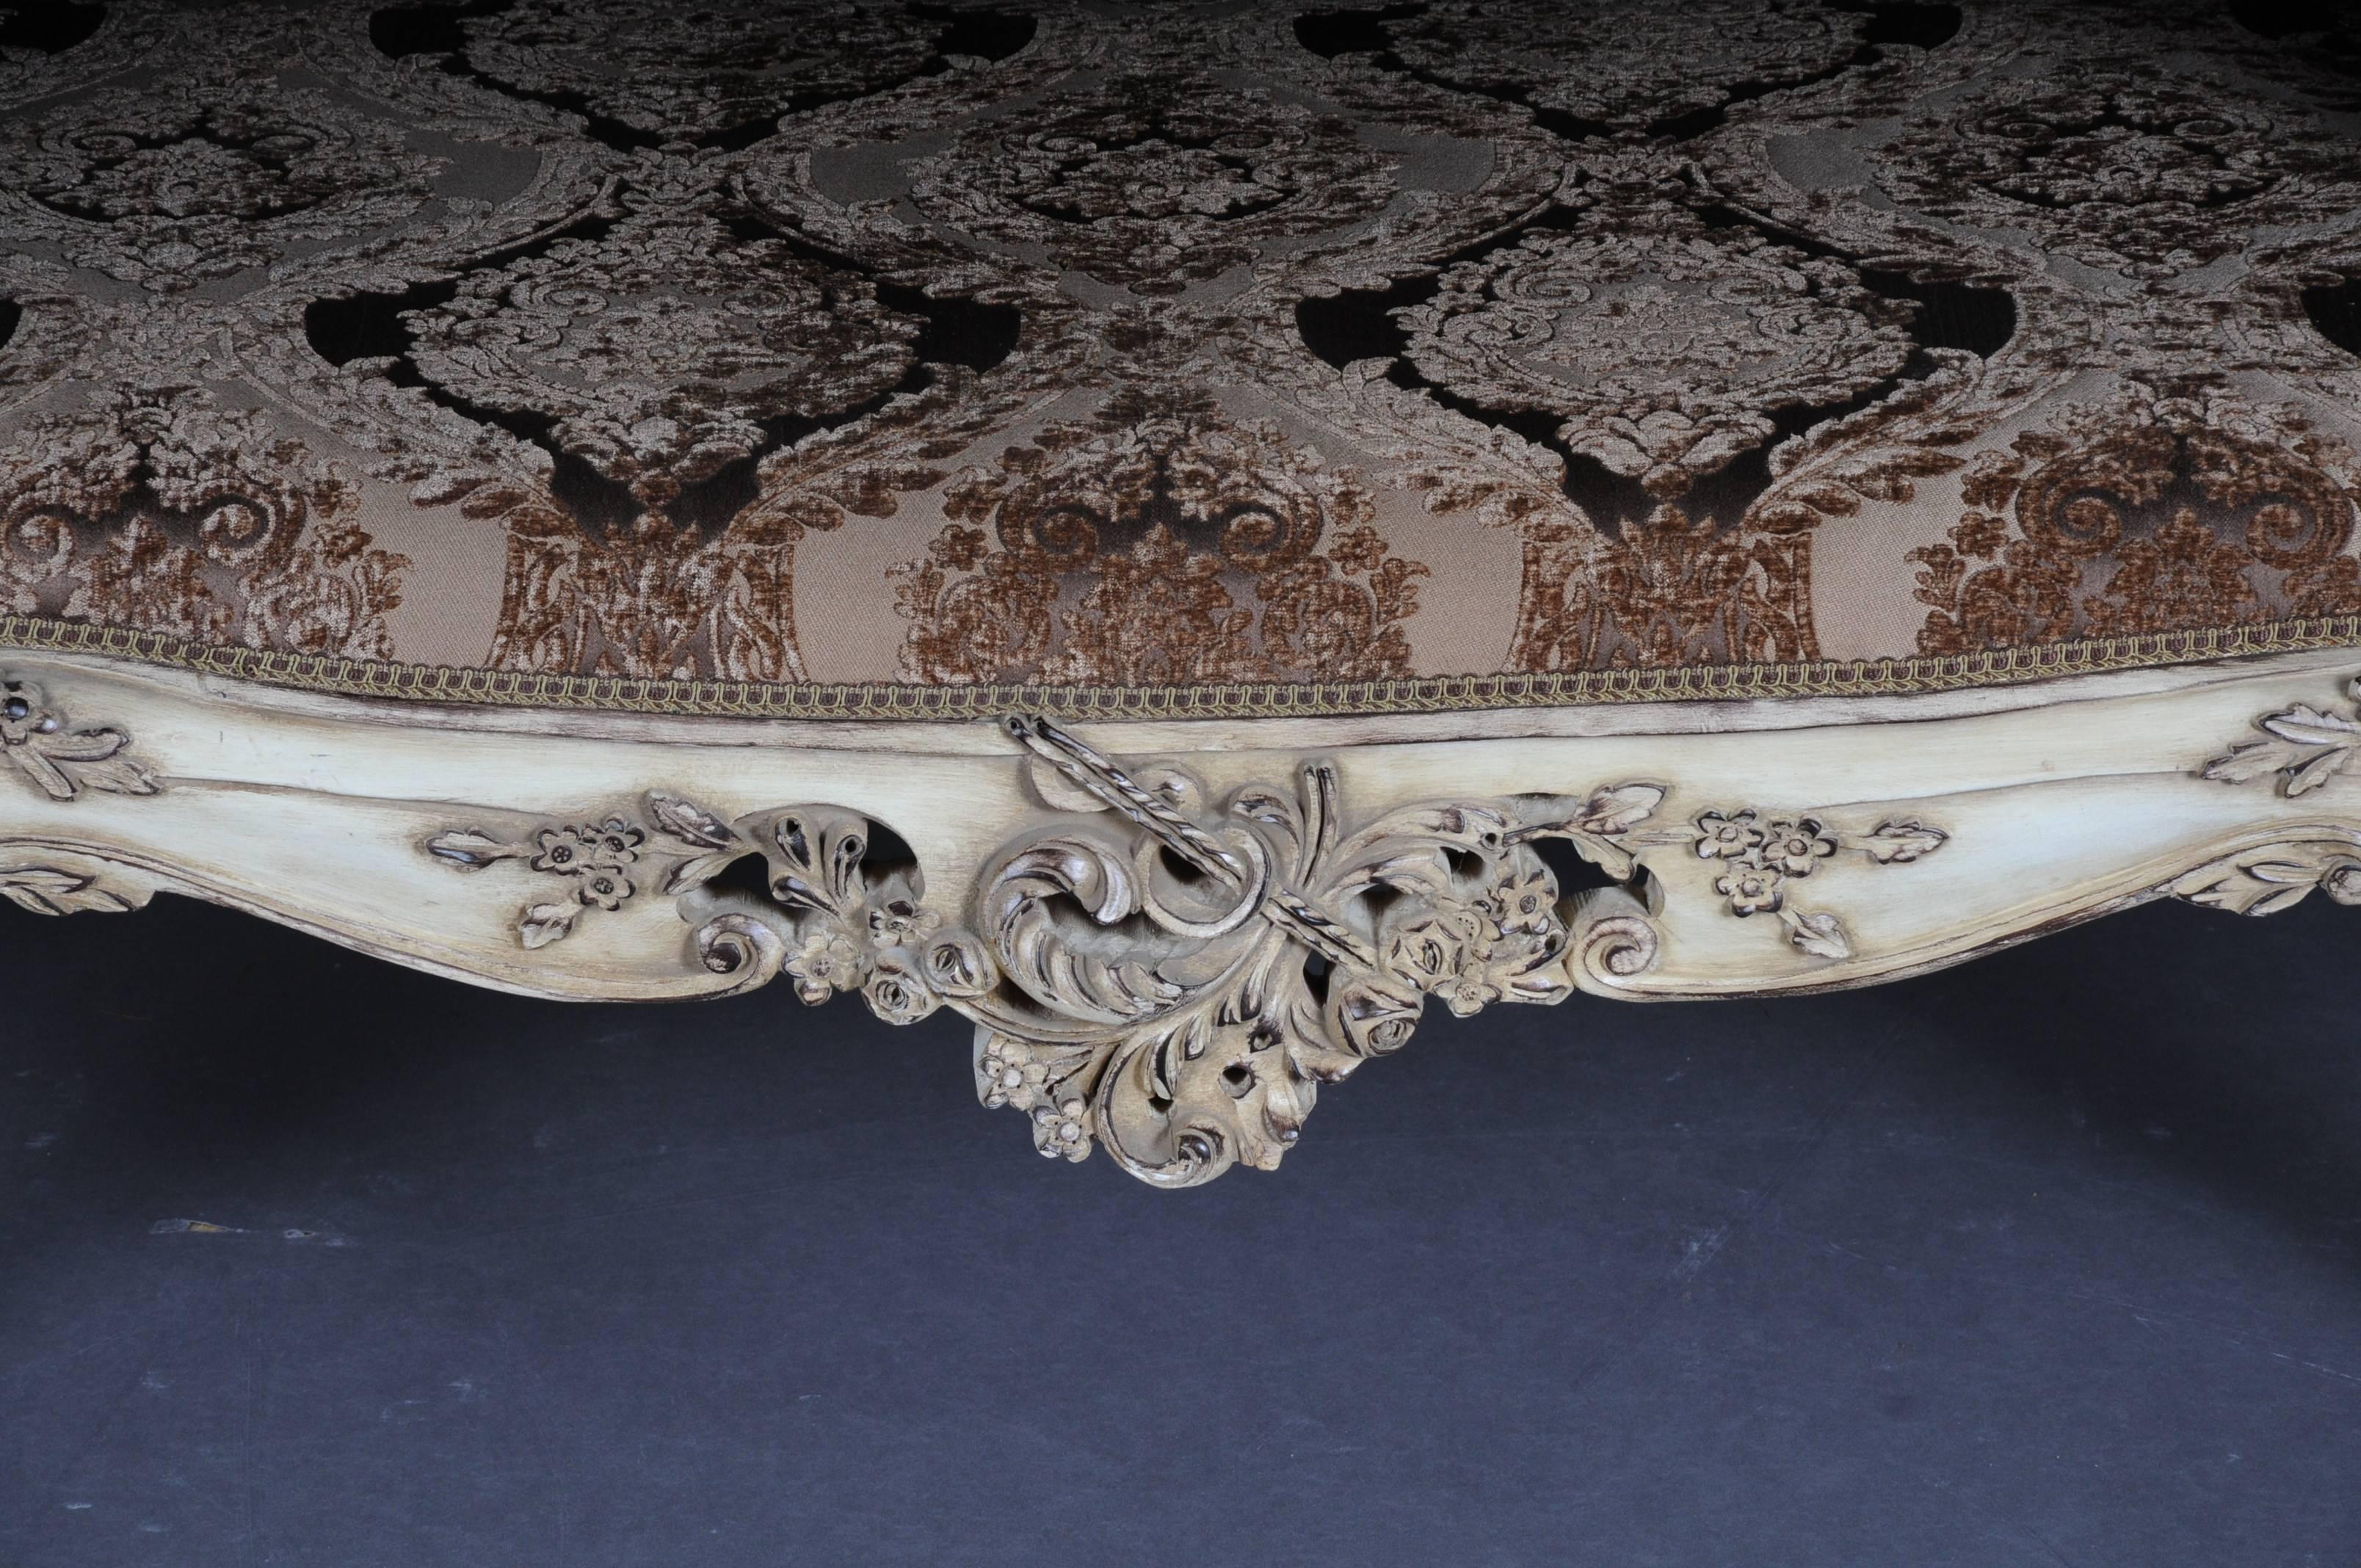 Luxurious French Bench, Gondola in the Louis Seize XVI In Good Condition For Sale In Berlin, DE